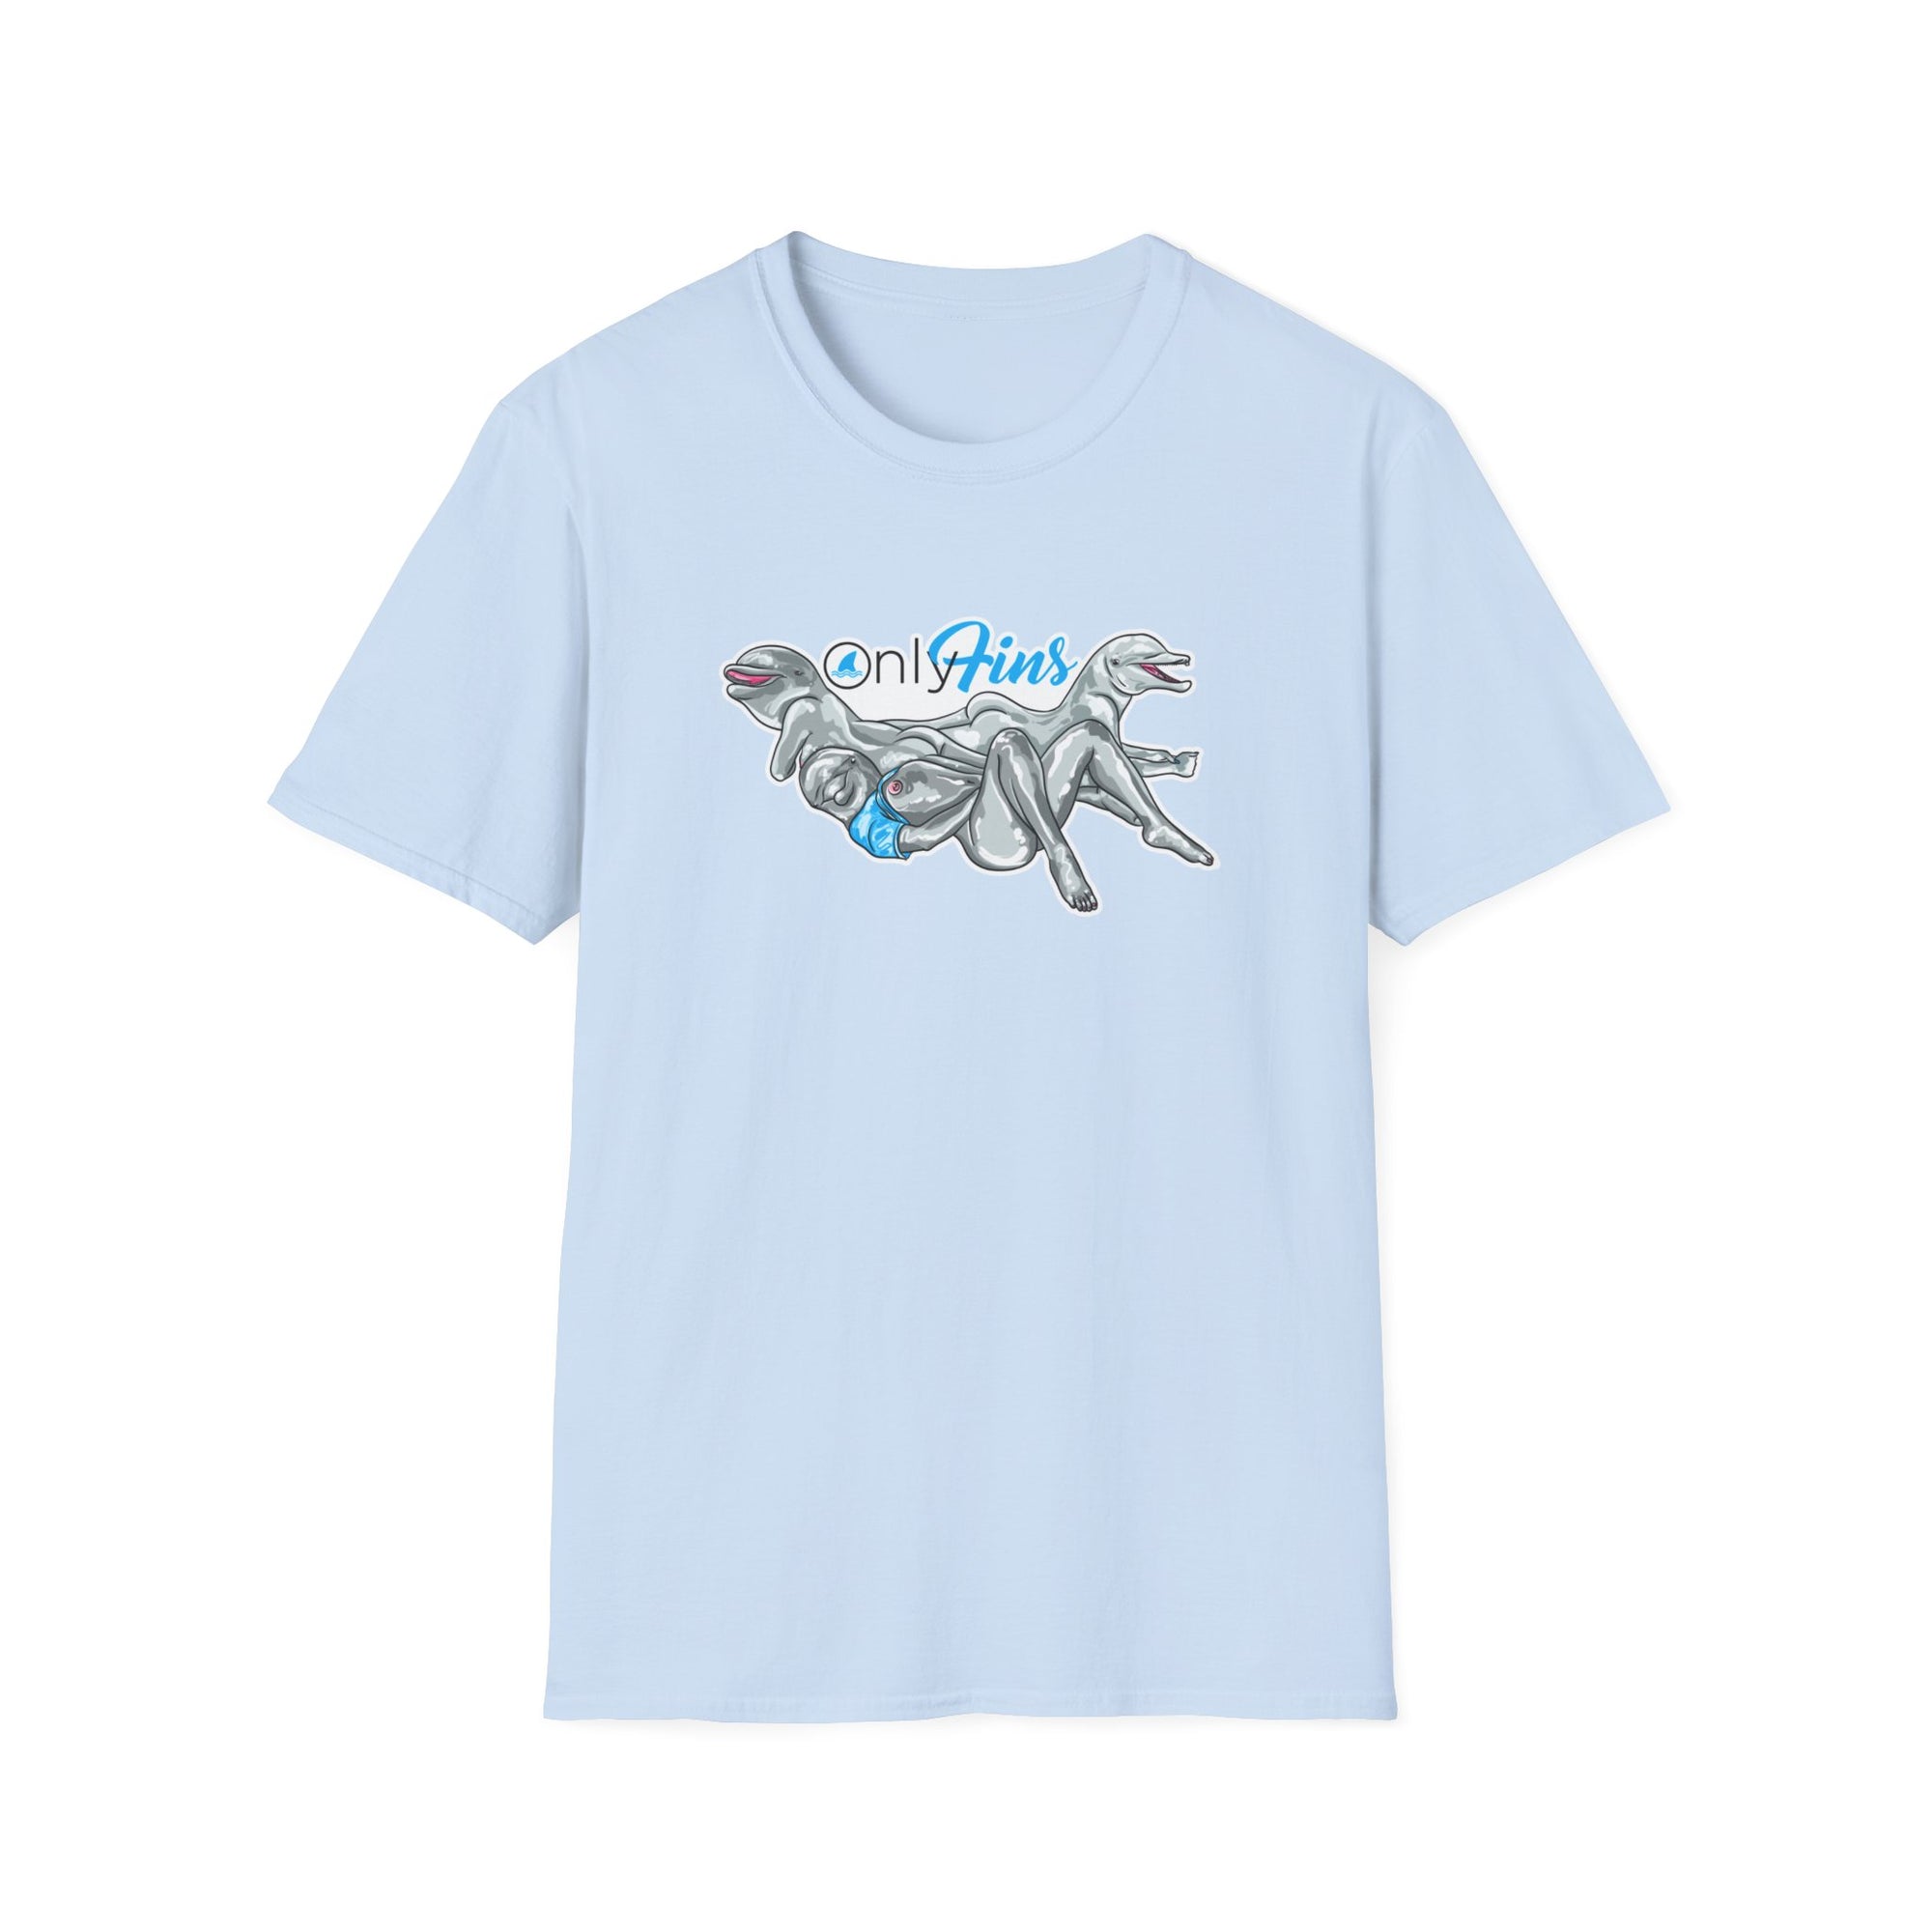 FOLLOW US ON ONLY FINS - Unisex Shirt